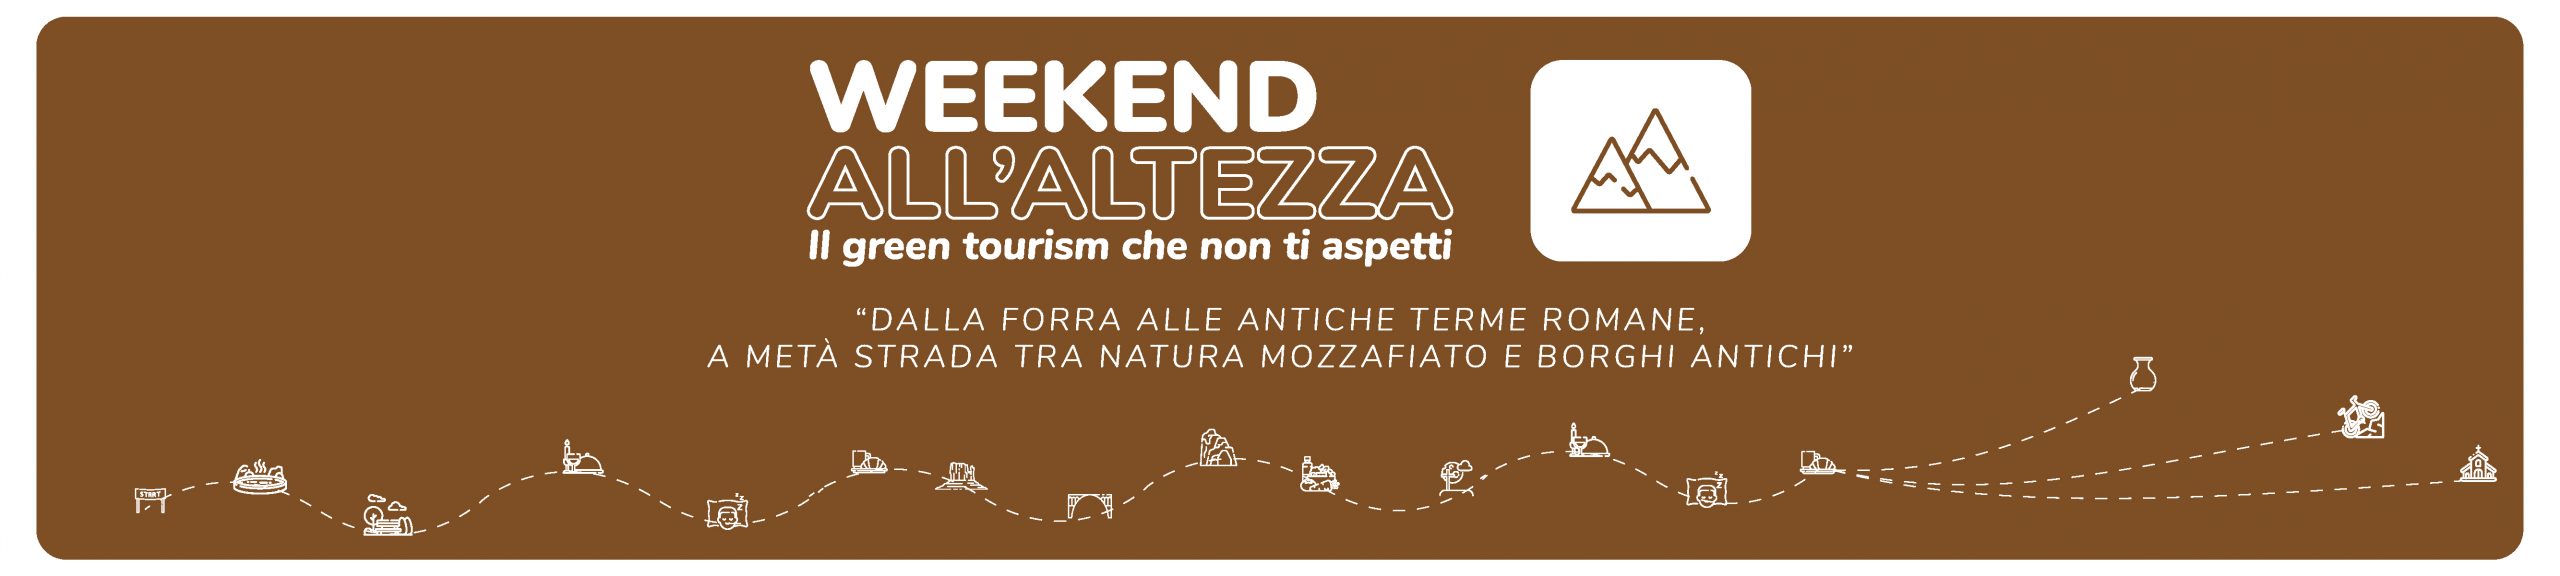 weekend all'altezza